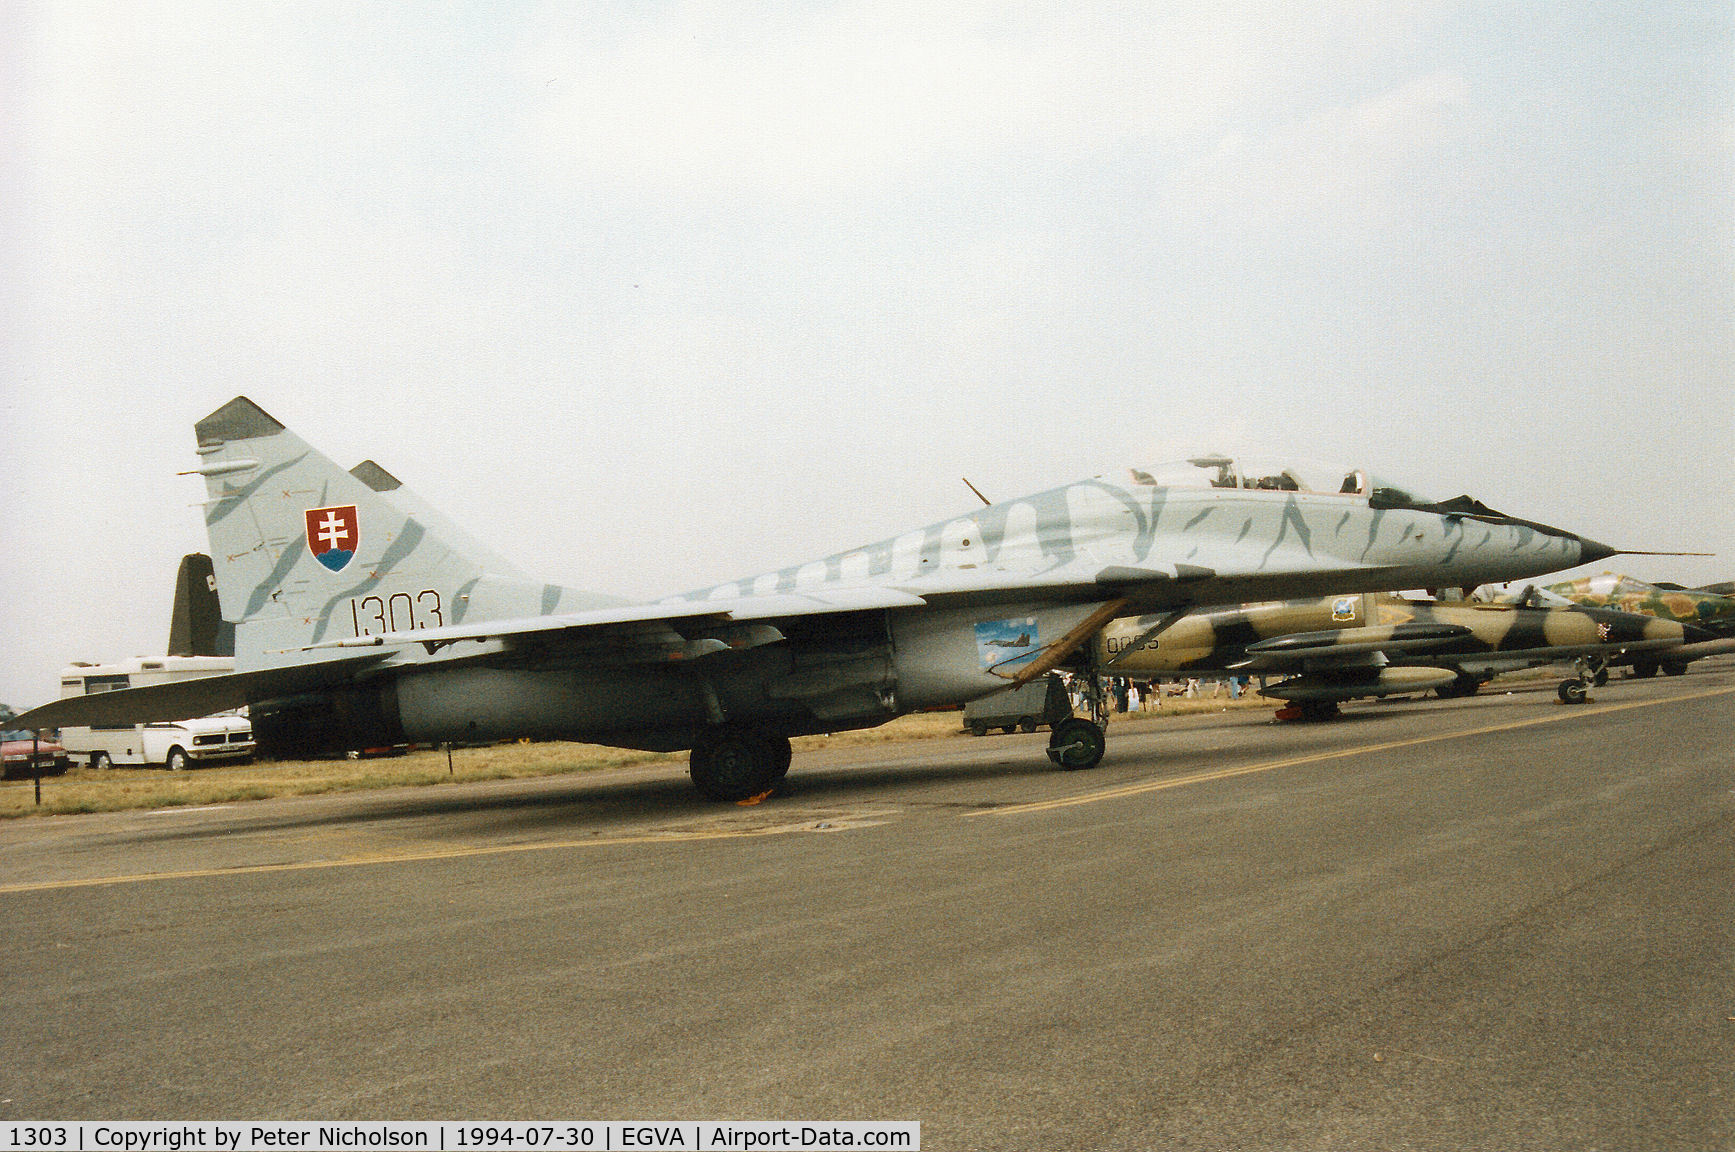 1303, Mikoyan-Gurevich MiG-29UB C/N N50903028113, Another view of the MiG-29UB Fulcrum from Sliac Air Base on display at the 1994 Intnl Air Tattoo at RAF Fairford.